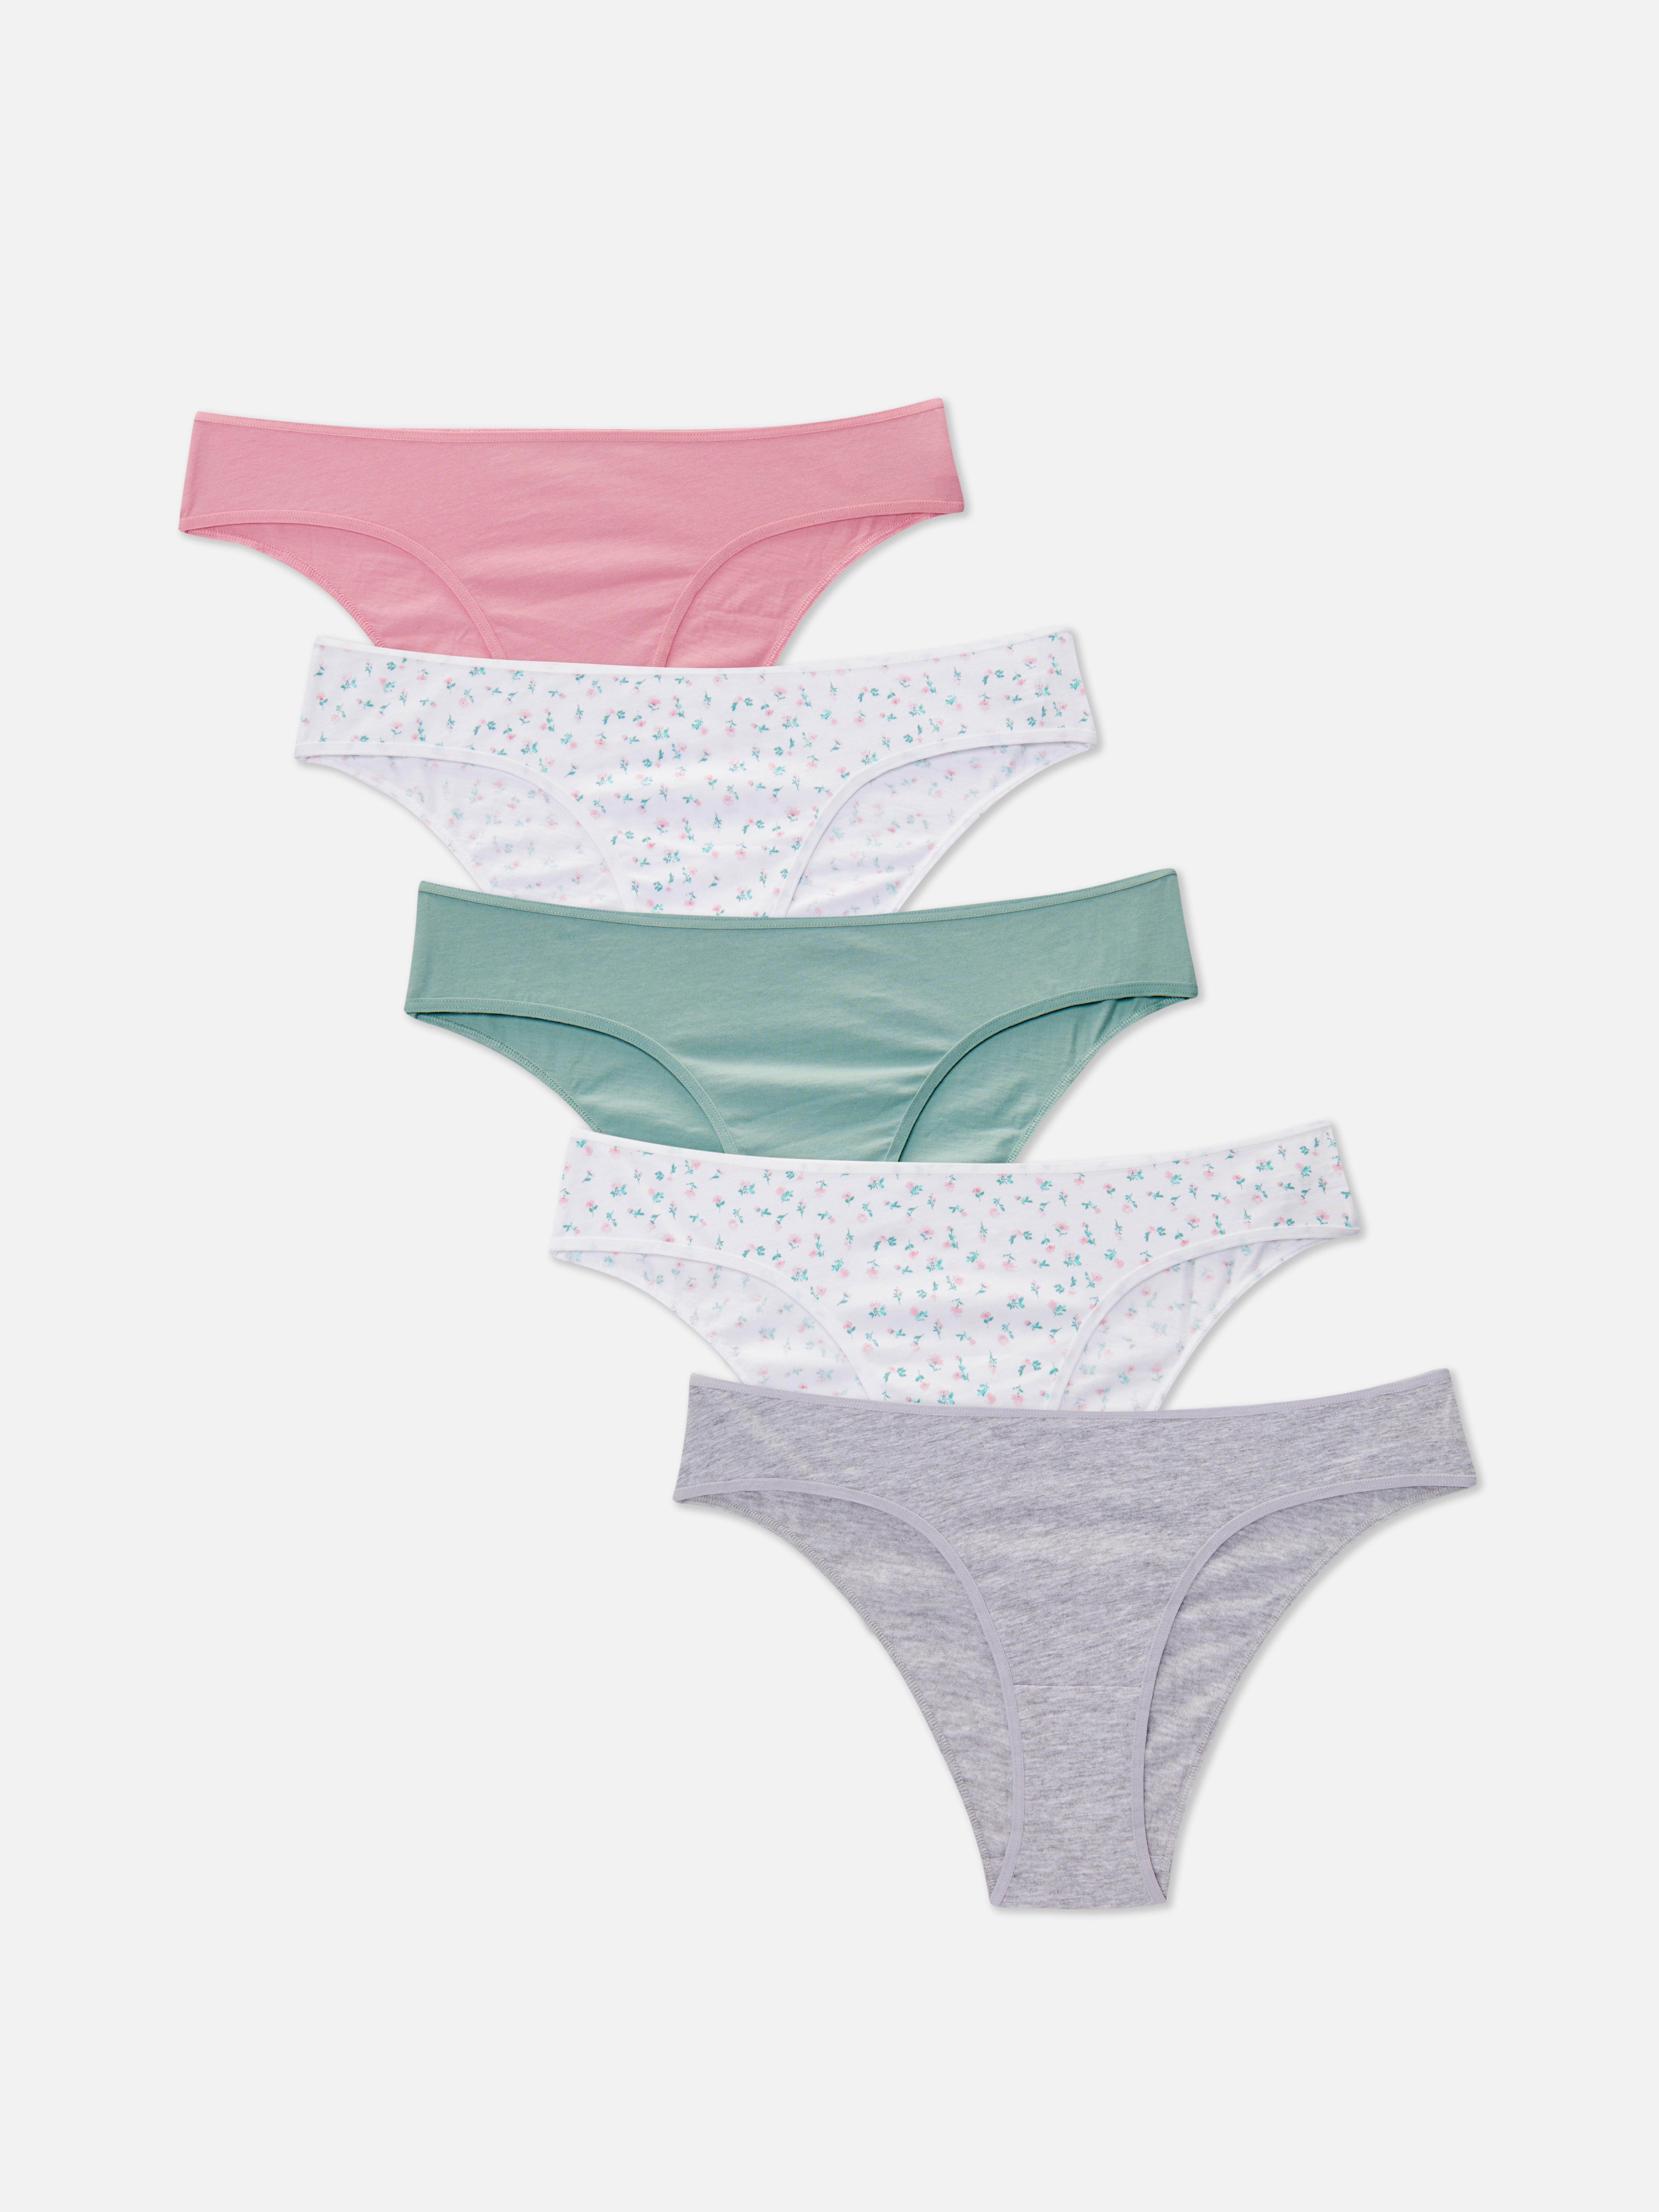 Primark Girls' Briefs, Bras and Socks New Collection